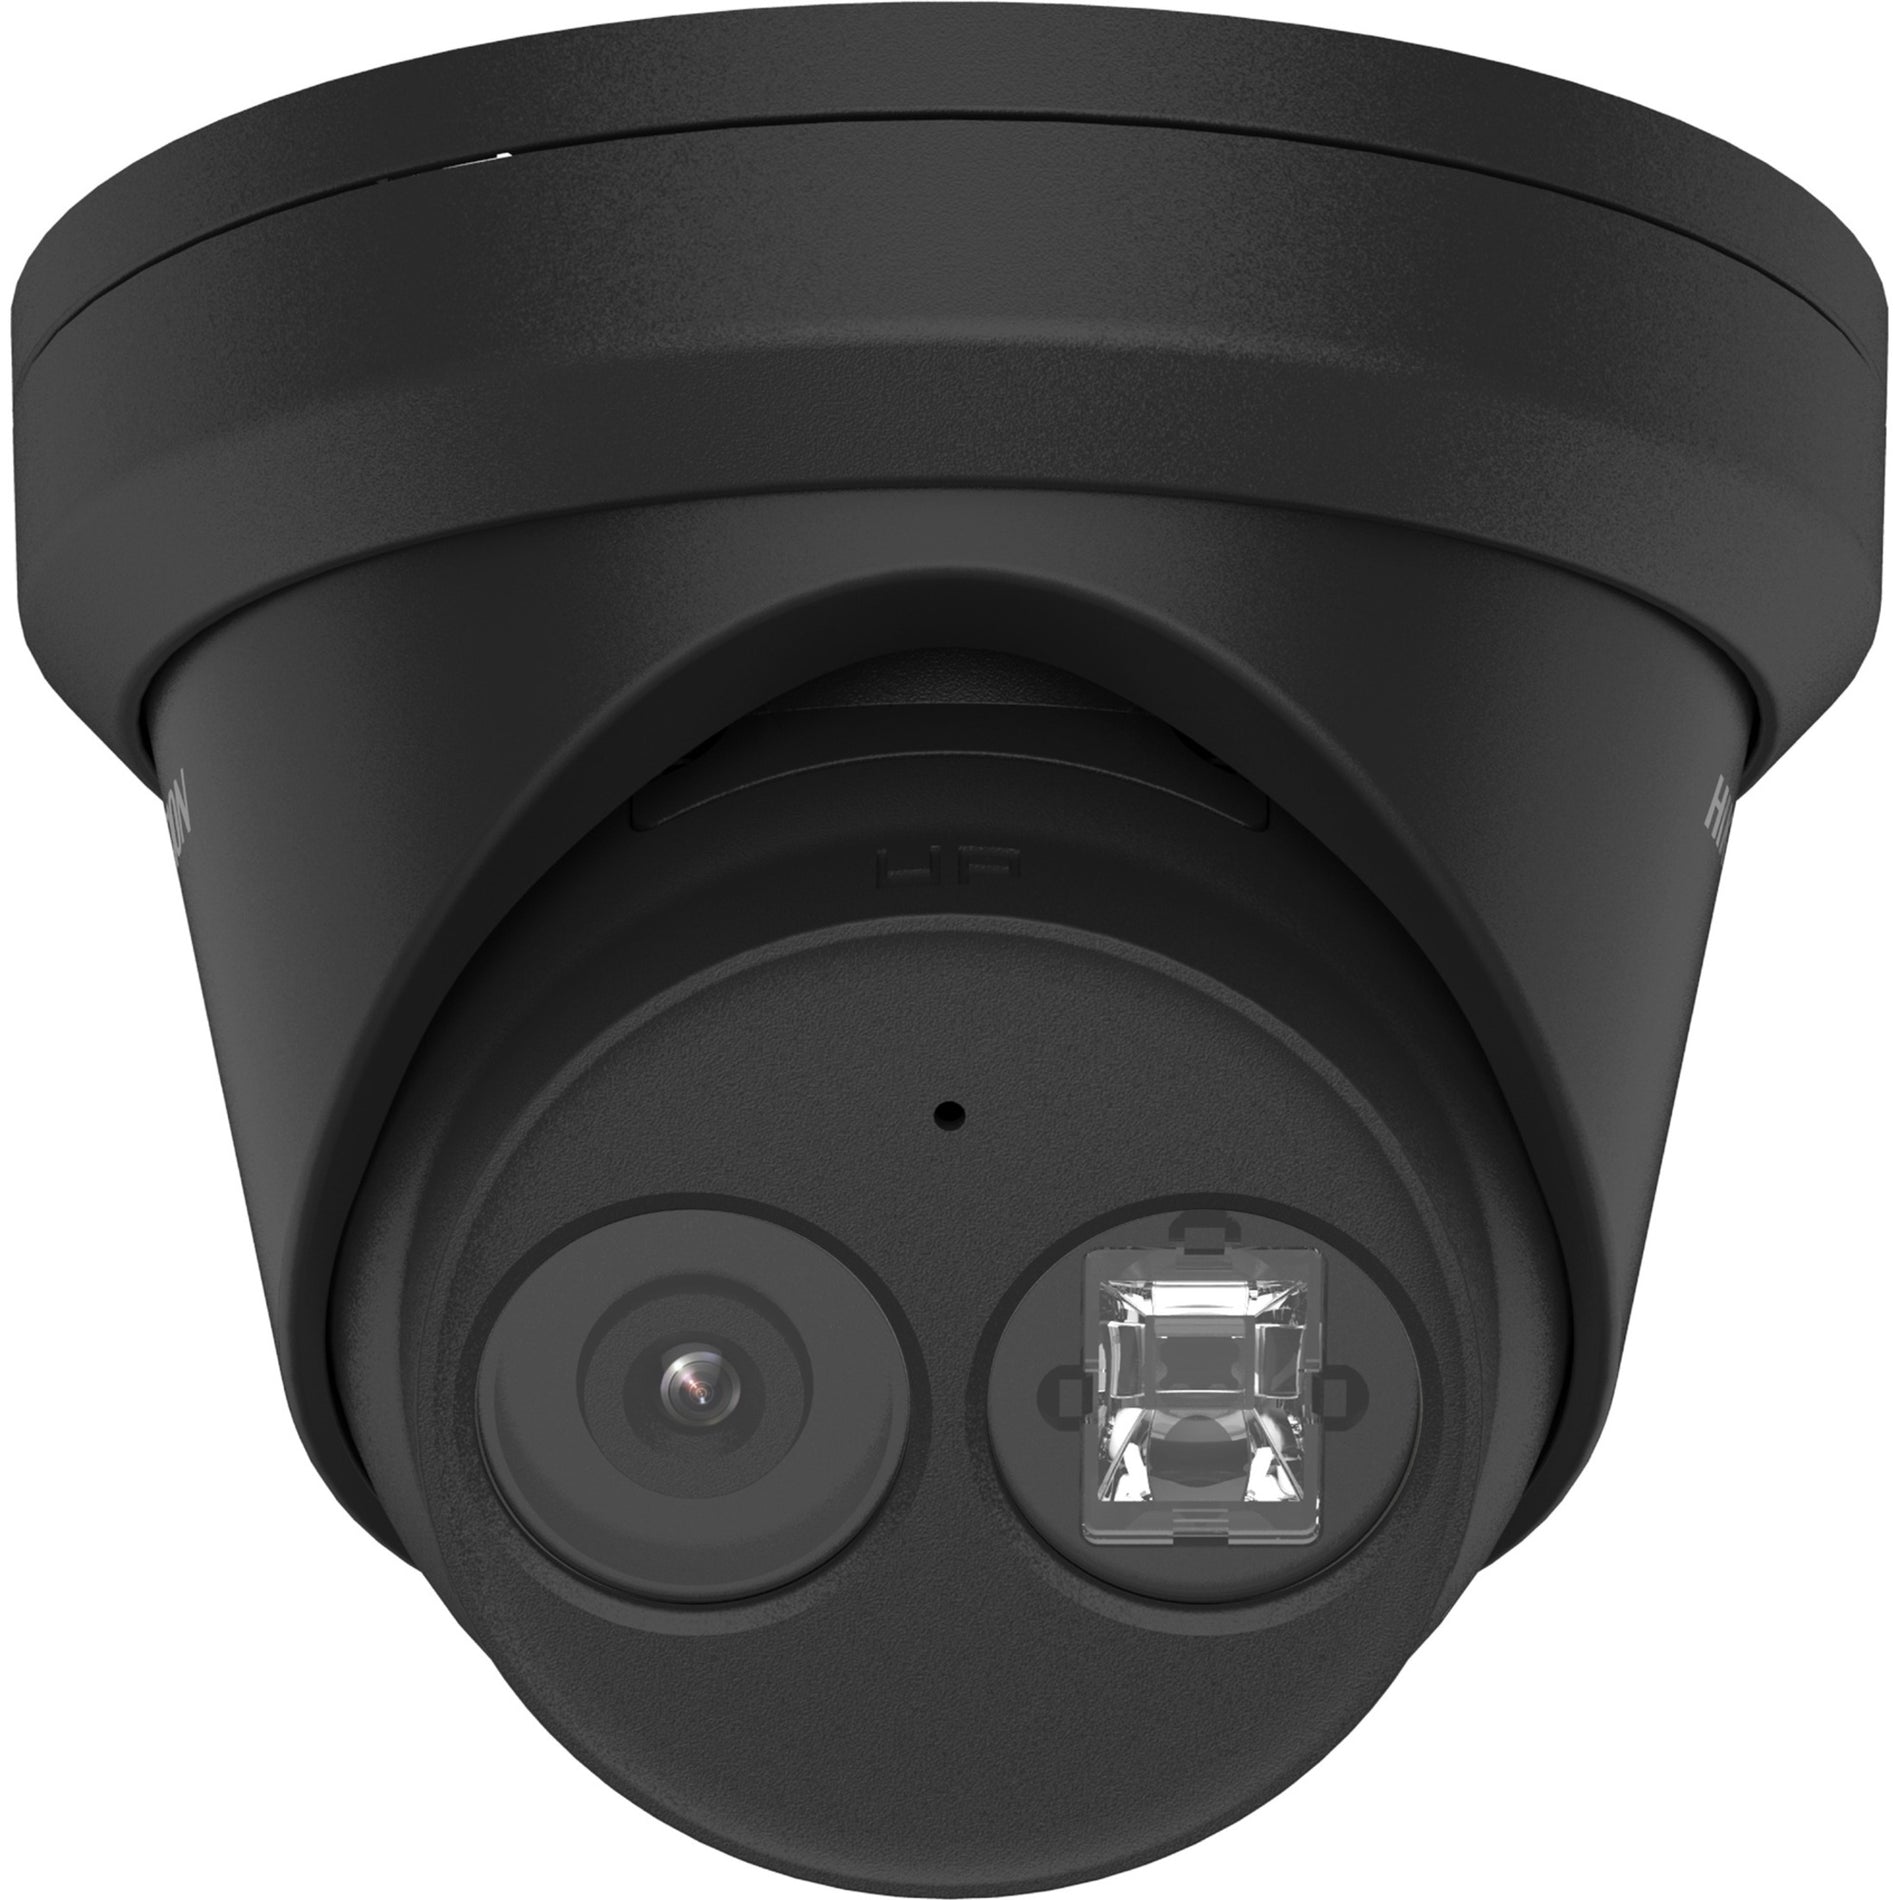 Hikvision DS-2CD2343G2-IU 2.8MM(BLACK) AcuSense 4 MP WDR Fixed Turret Network Camera, 2.8mm Lens, 2688 x 1520 Resolution, IP67 Rated